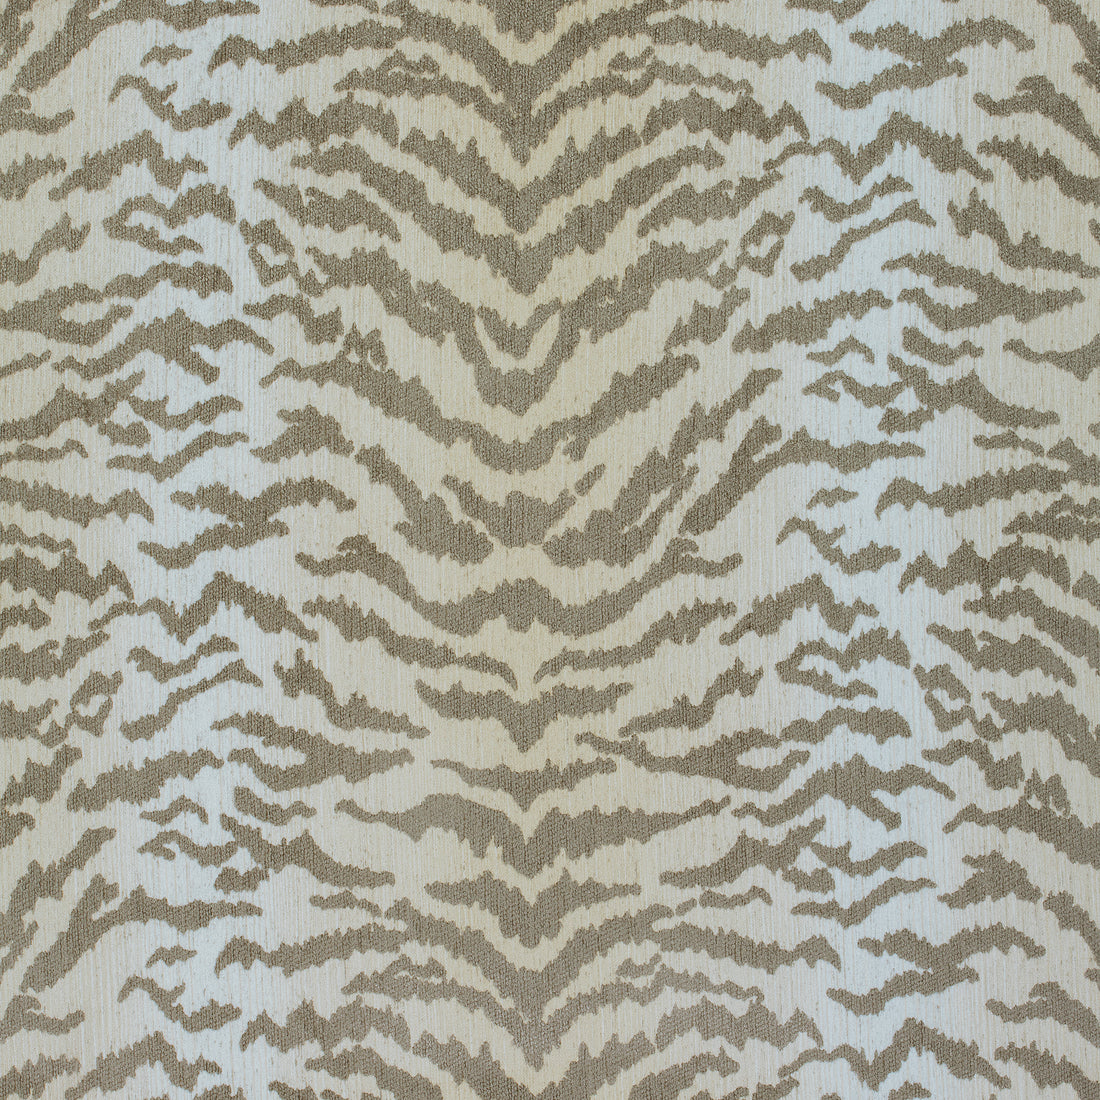 Aja fabric in linen color - pattern number W80449 - by Thibaut in the Woven Resource Vol 10 Menagerie collection